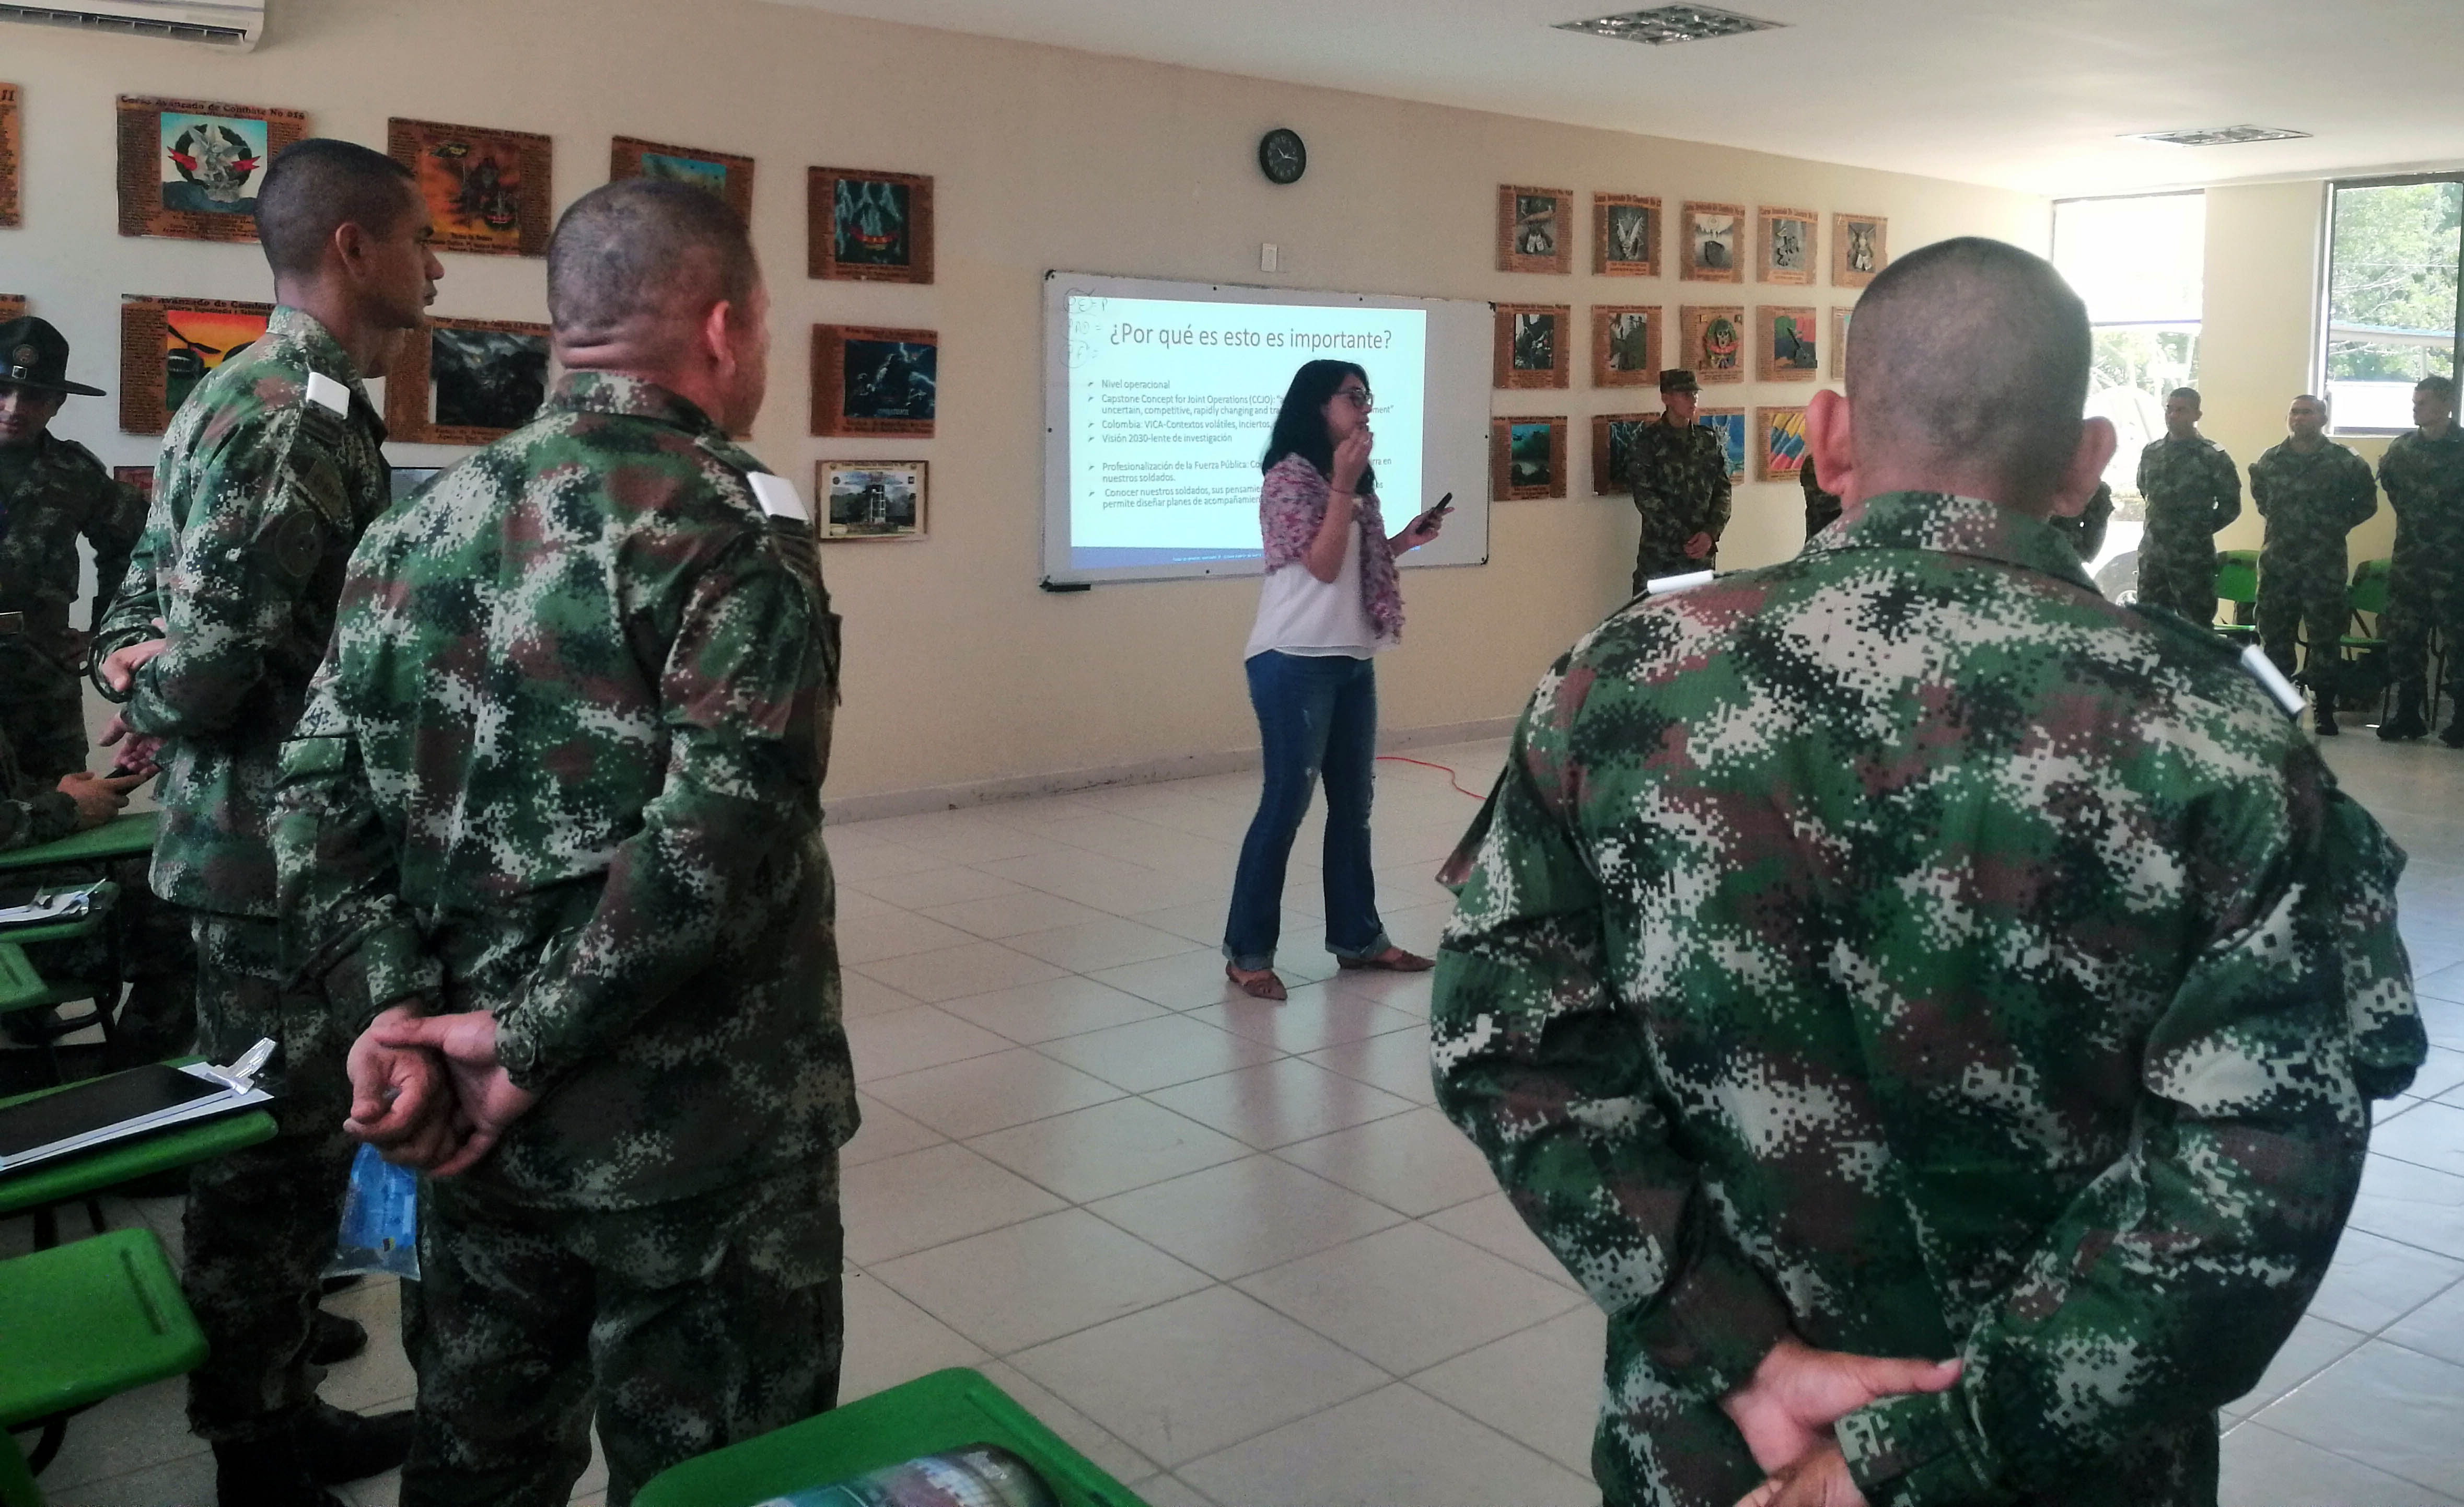 Slider Image Rei Foundation scholar Alejandra Del Pilar Ortiz-Ayala works with soldiers from the state army in Colombia.